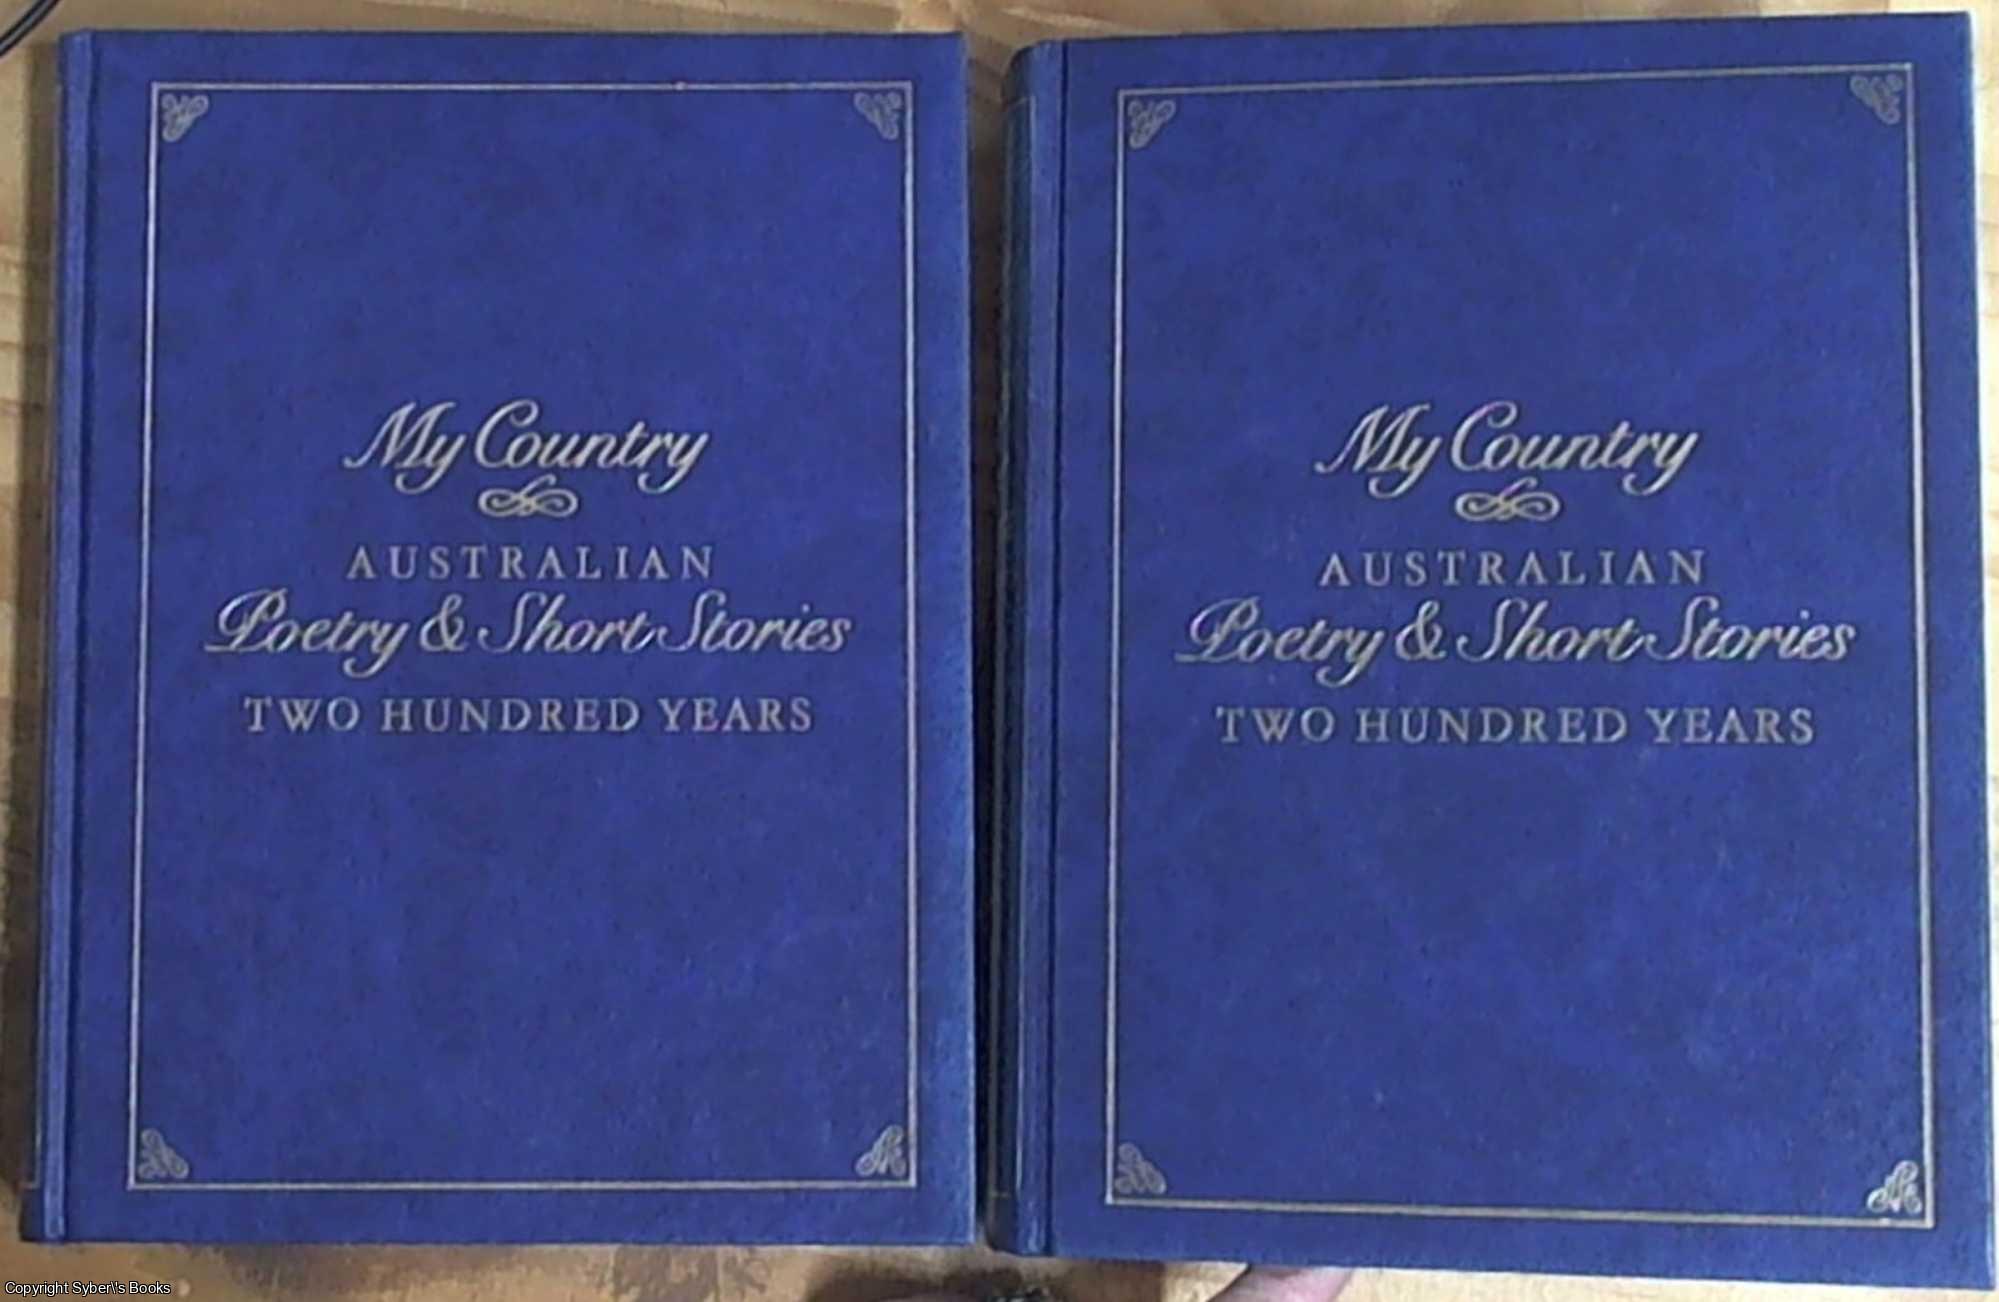 Kramer, Leonie -- Editor - My Country Australian Poetry & Short Stories Two Hundred Years Volume 1 Beginnings  1930s & Volume 2 1930s- 1980's Selected and with an Introduction by Leonie Kramer